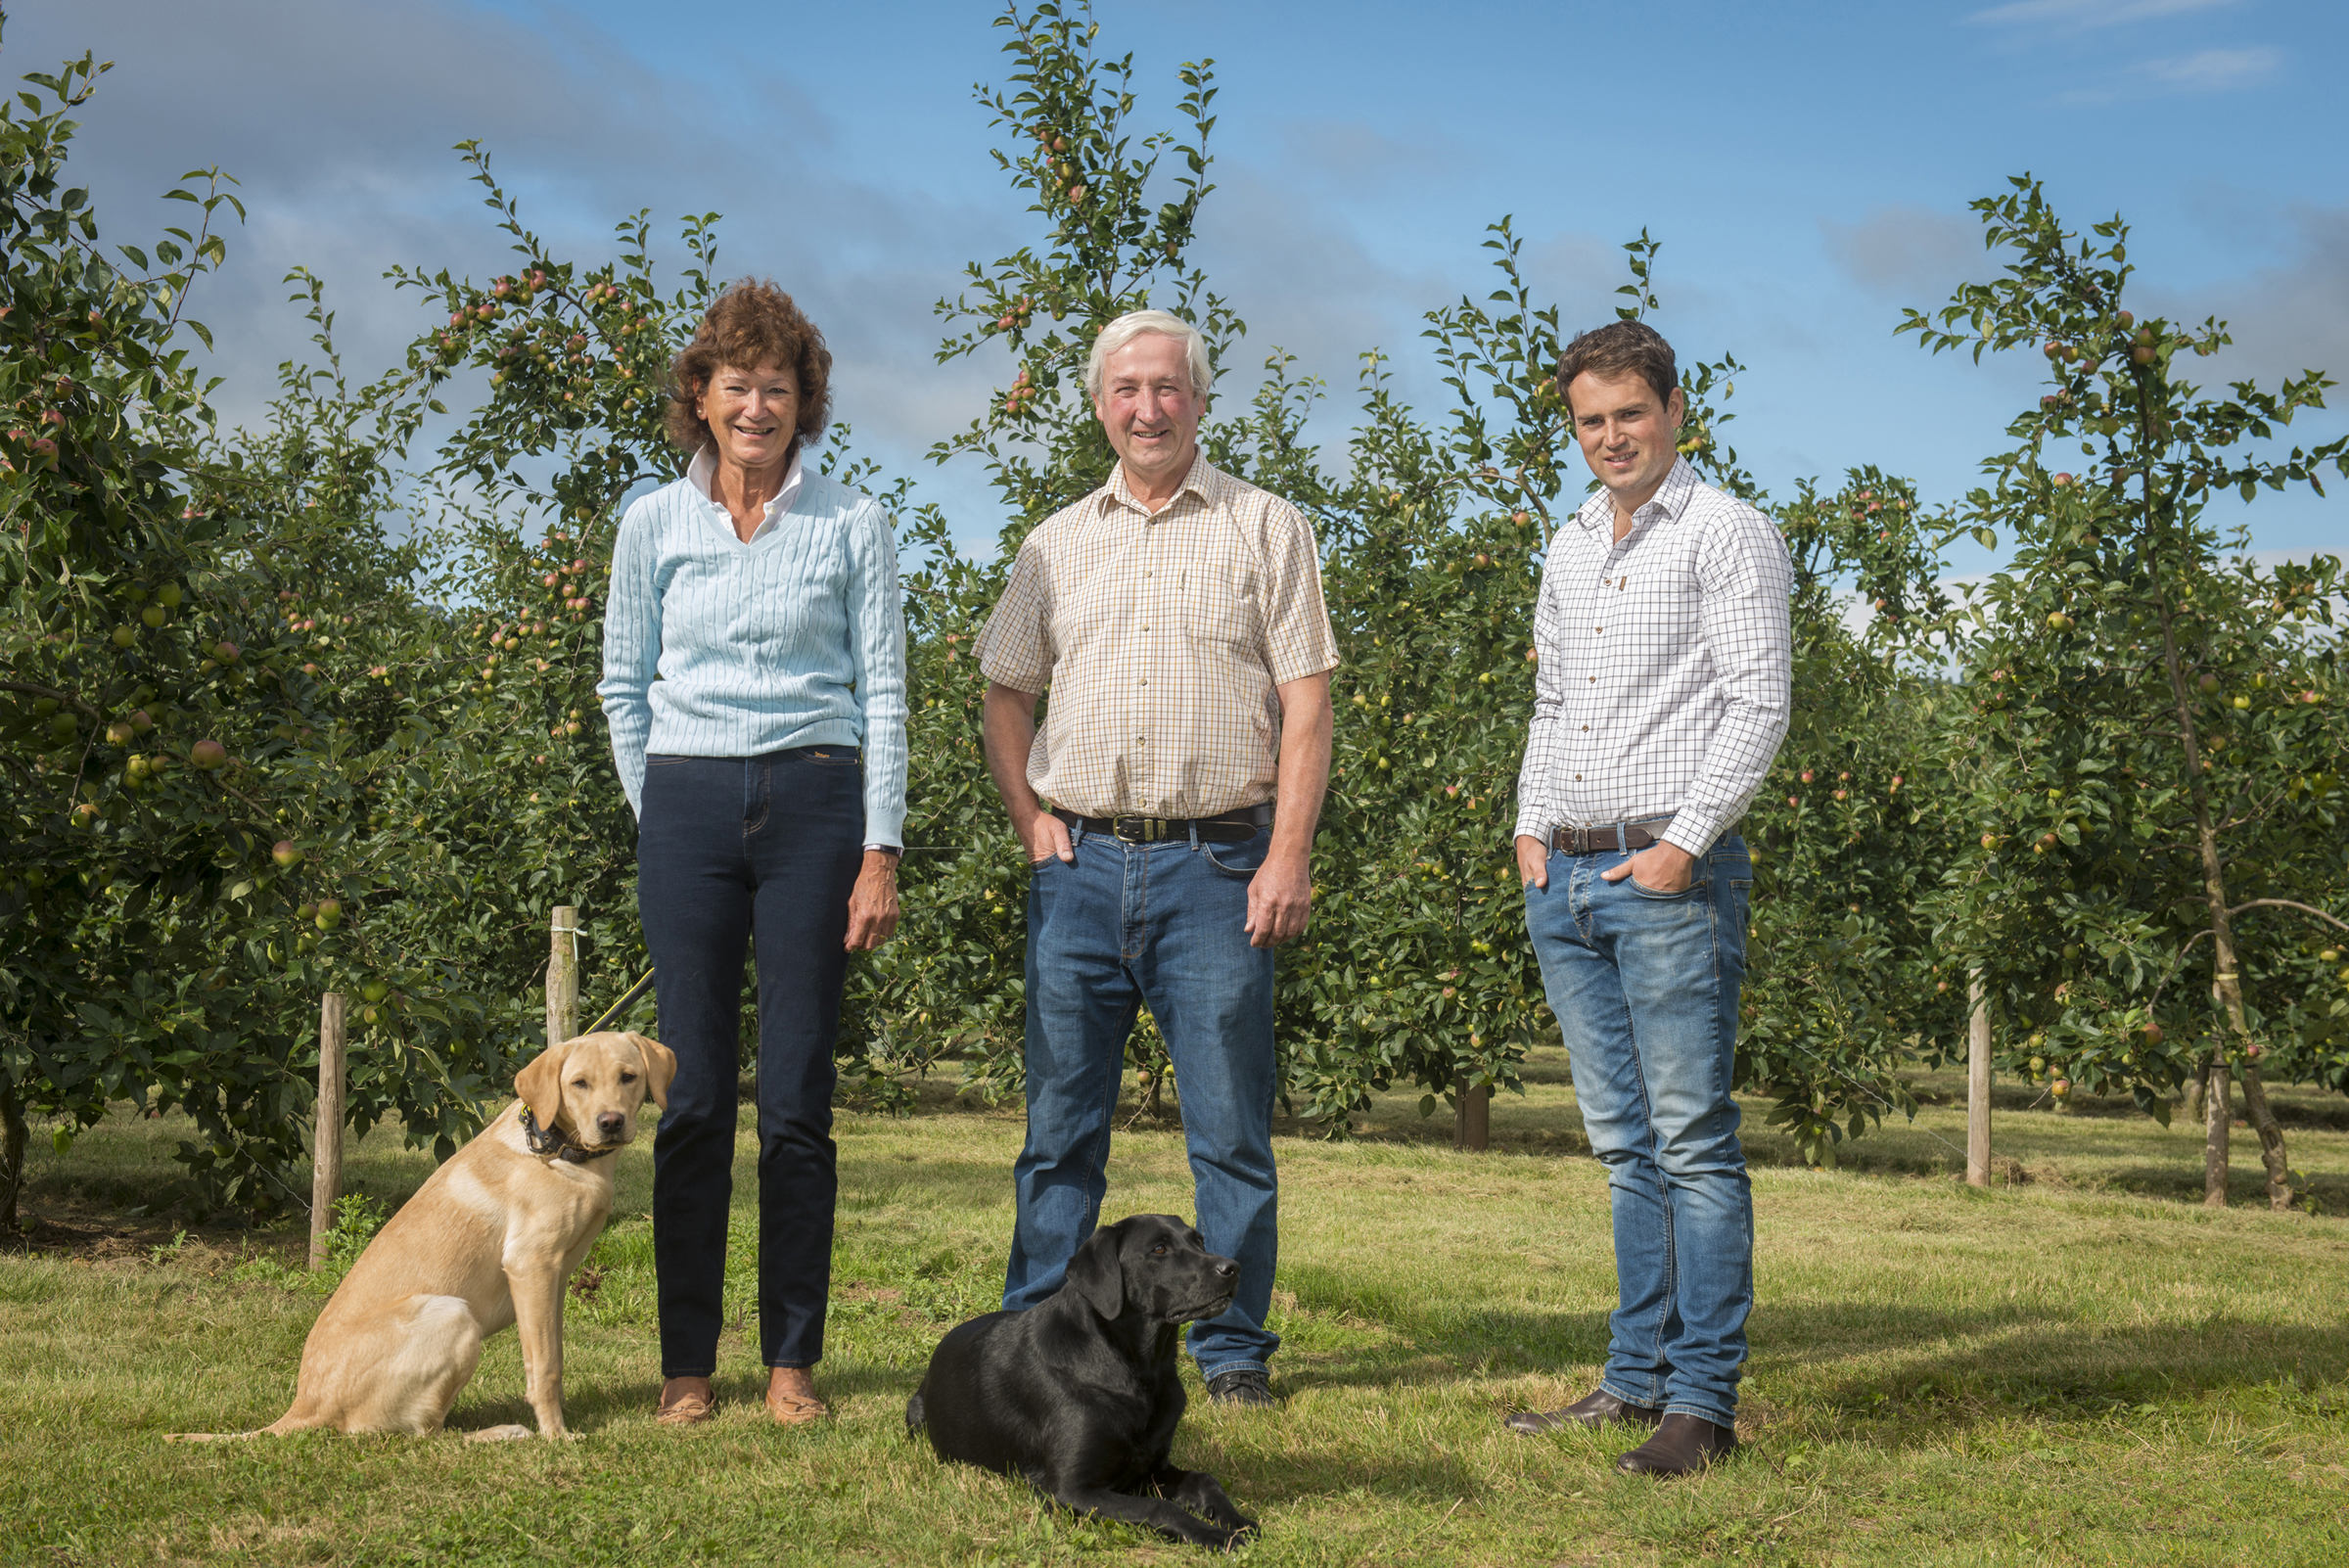 Meet our apple growers: The Griffiths Family